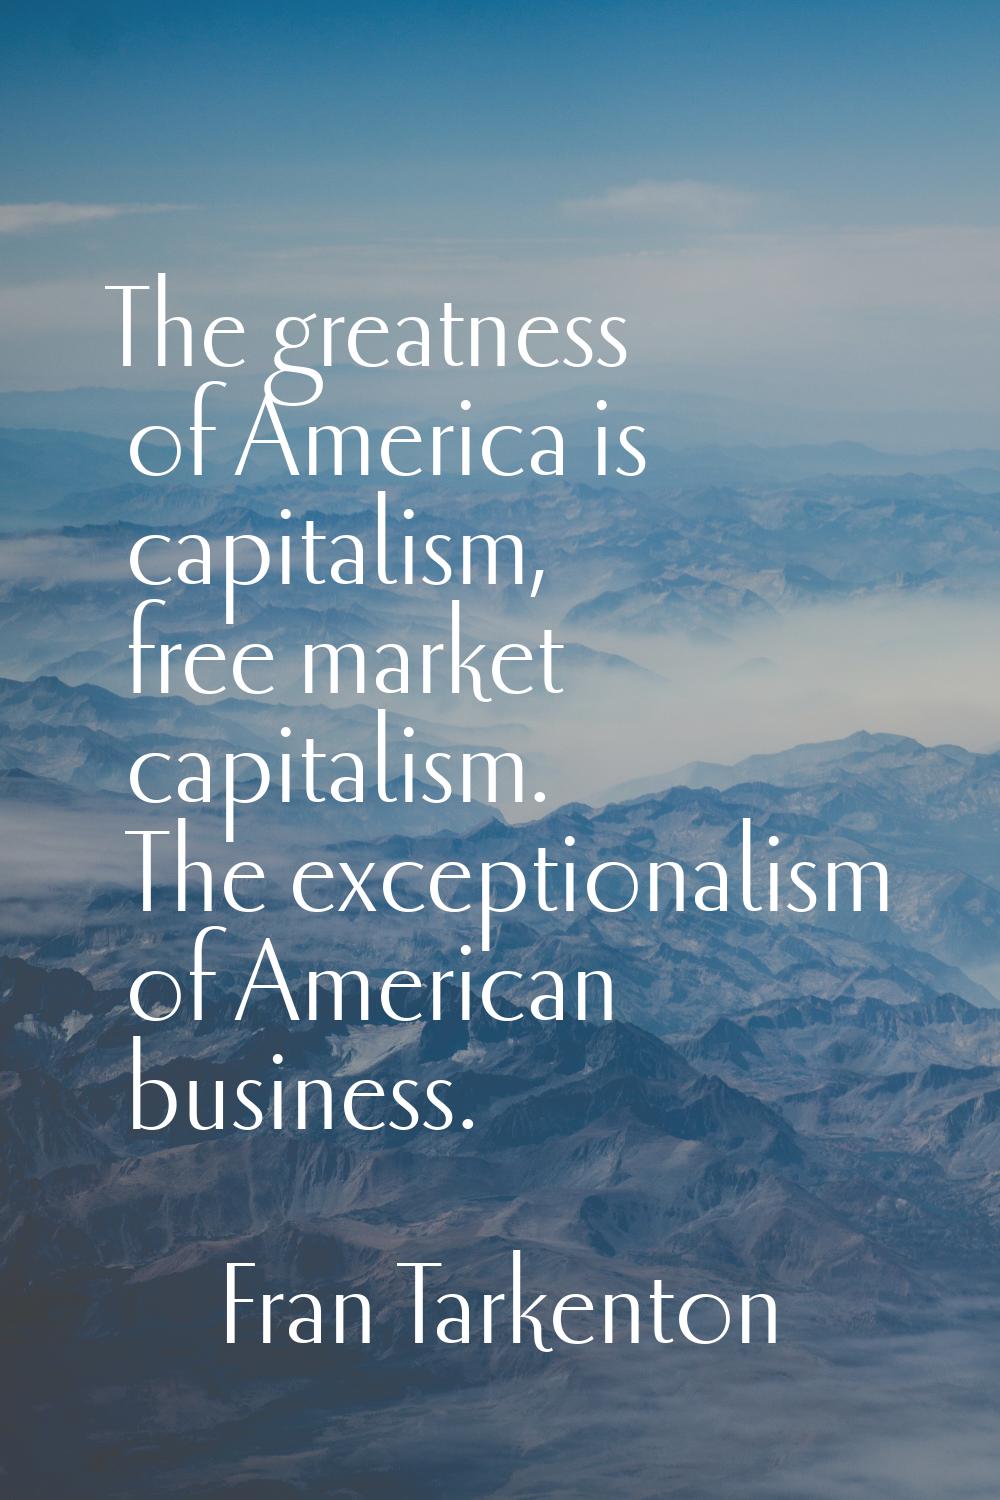 The greatness of America is capitalism, free market capitalism. The exceptionalism of American busi